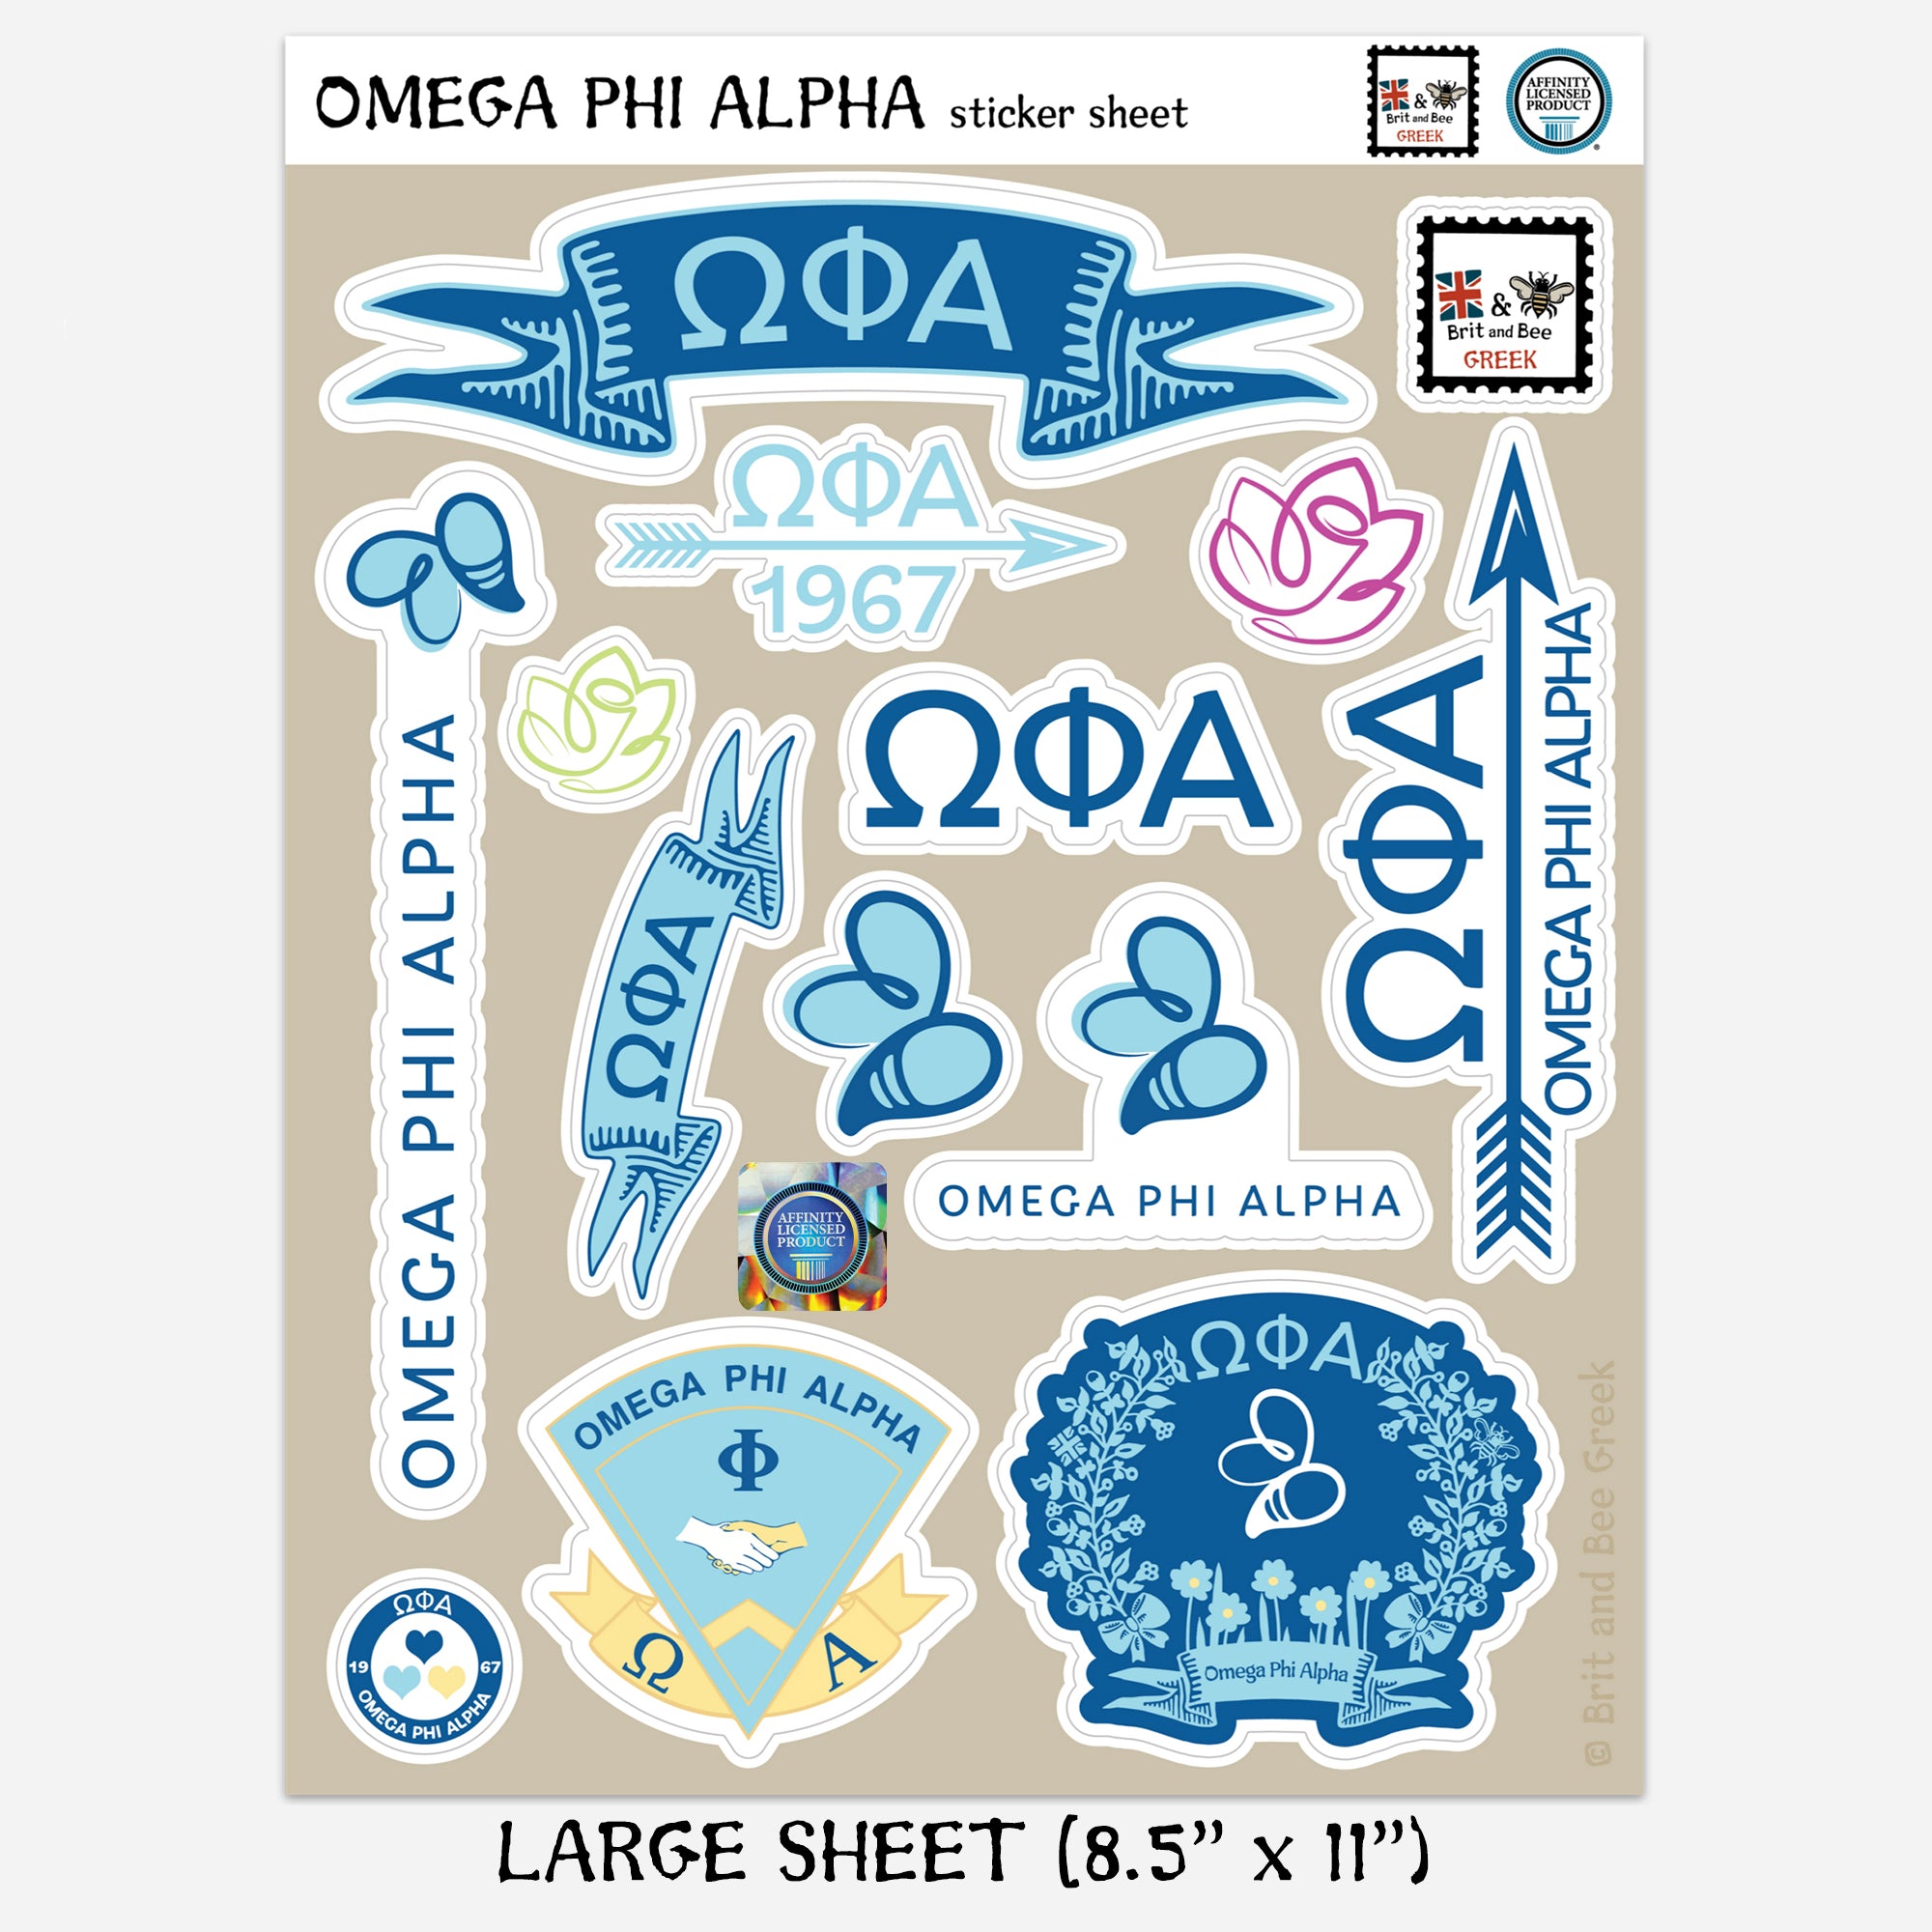 Omega Phi Alpha Sticker Sheet | Brit and Bee